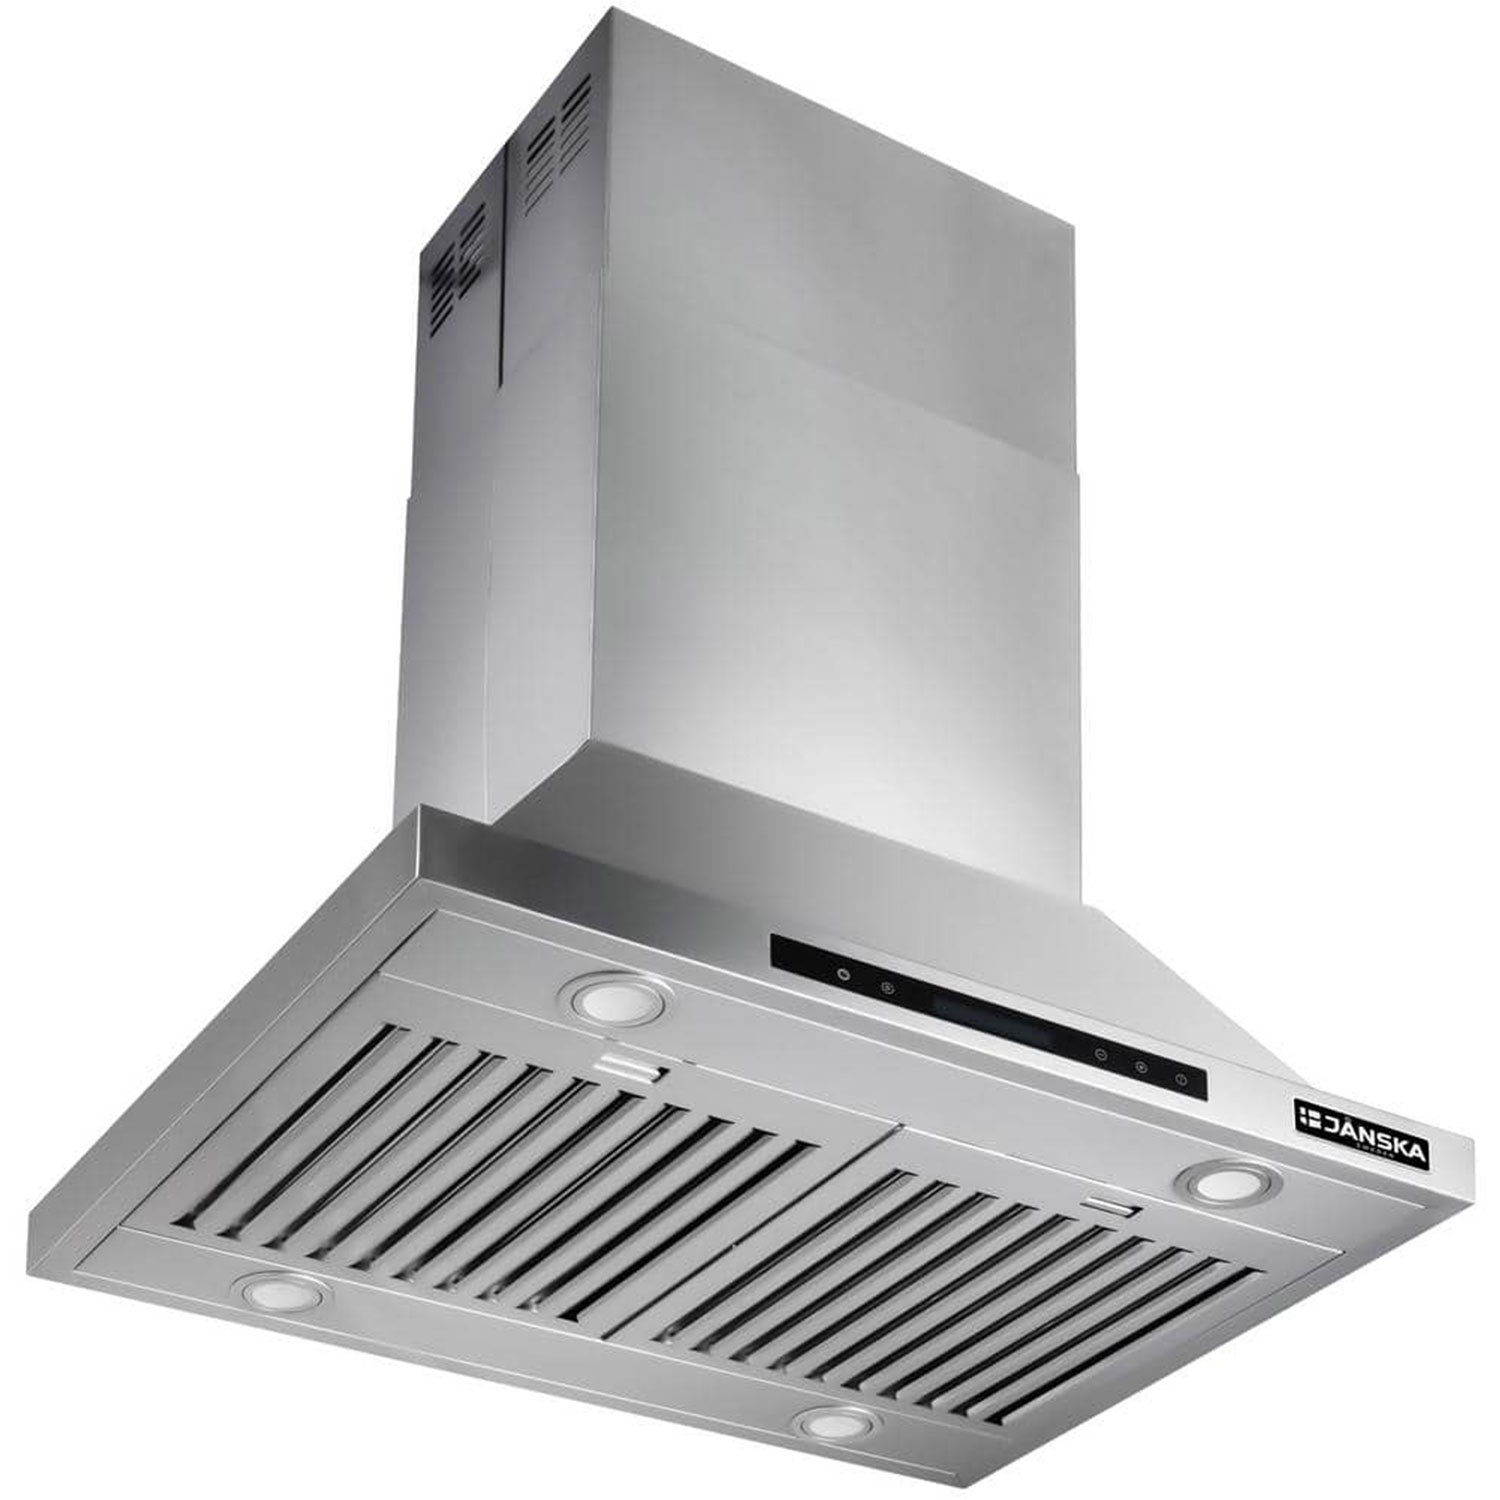 30-in.-850-CFM-Ducted-Island-Mount-Range-Hood-in-Stainless-Steel-with-Touch-Display-LED-Lights-and-Permanent-Filters-3-(1)